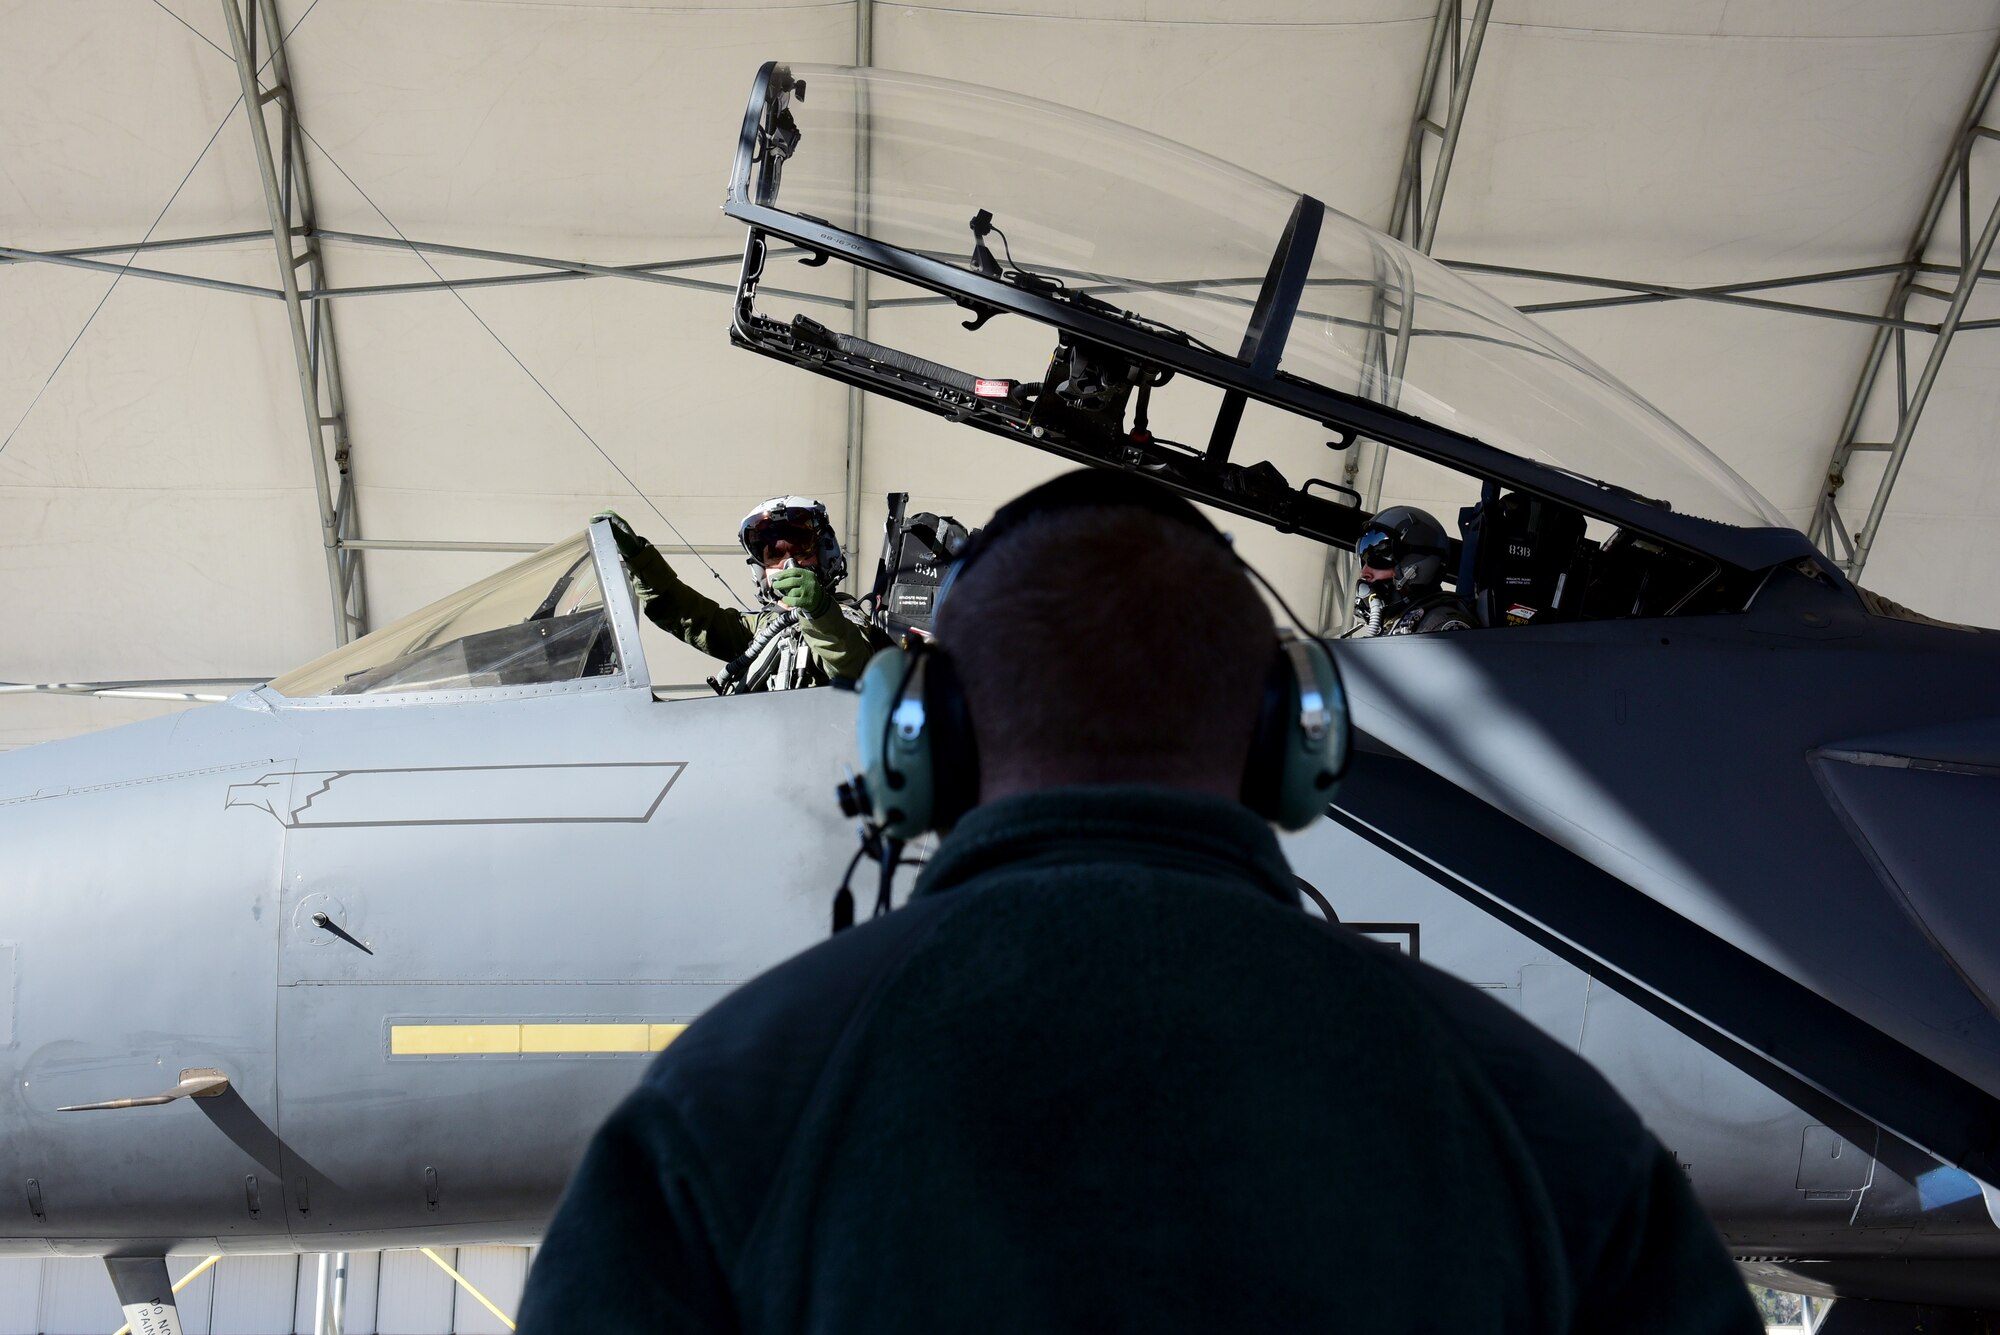 An F-15E Strike Eagle pilot and weapon systems operator with the 335th Fighter Squadron, prepare to taxi to participate in exercise Razor Talon, Nov. 17, 2017, at Seymour Johnson Air Force Base, North Carolina. The exercise provides service members a unique opportunity to participate in a monthly large-force training exercise for joint East Coast tactical and support aviation units. (U.S. Air Force photo by Airman 1st Class Kenneth Boyton)